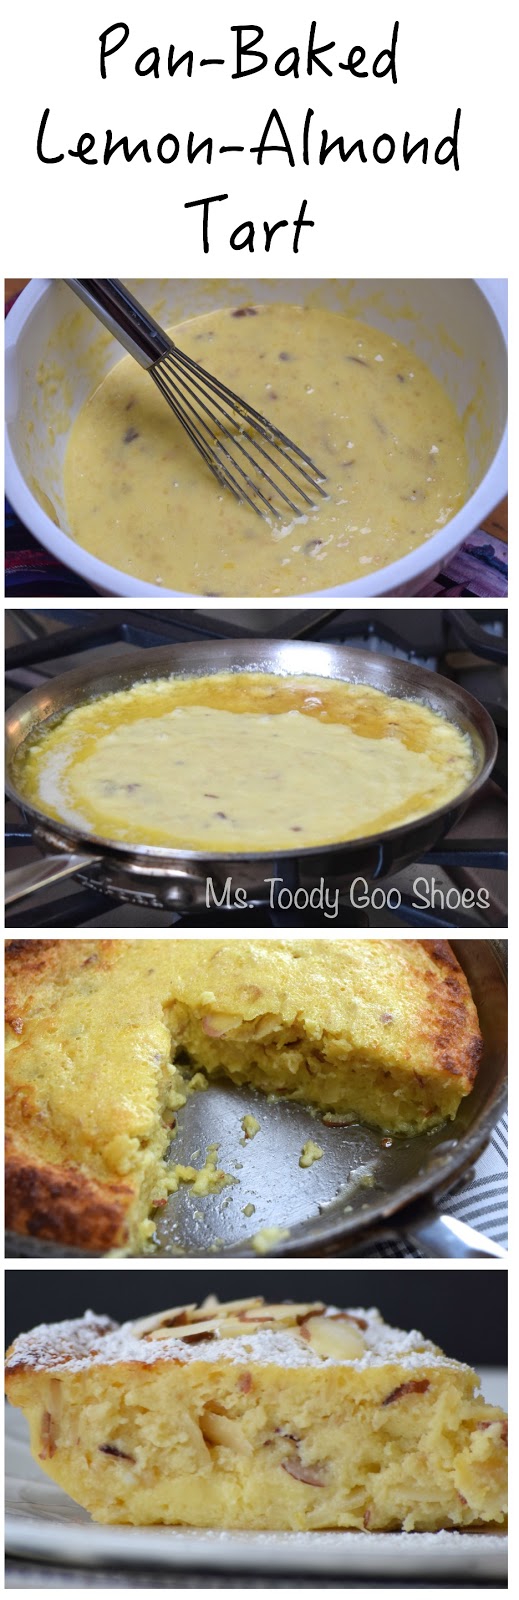 Pan-Baked Lemon-Almond Tart: From start to finish, this custardy tart takes only 20 minutes. It just may be the best thing I've ever made! | Ms. Toody Goo Shoes